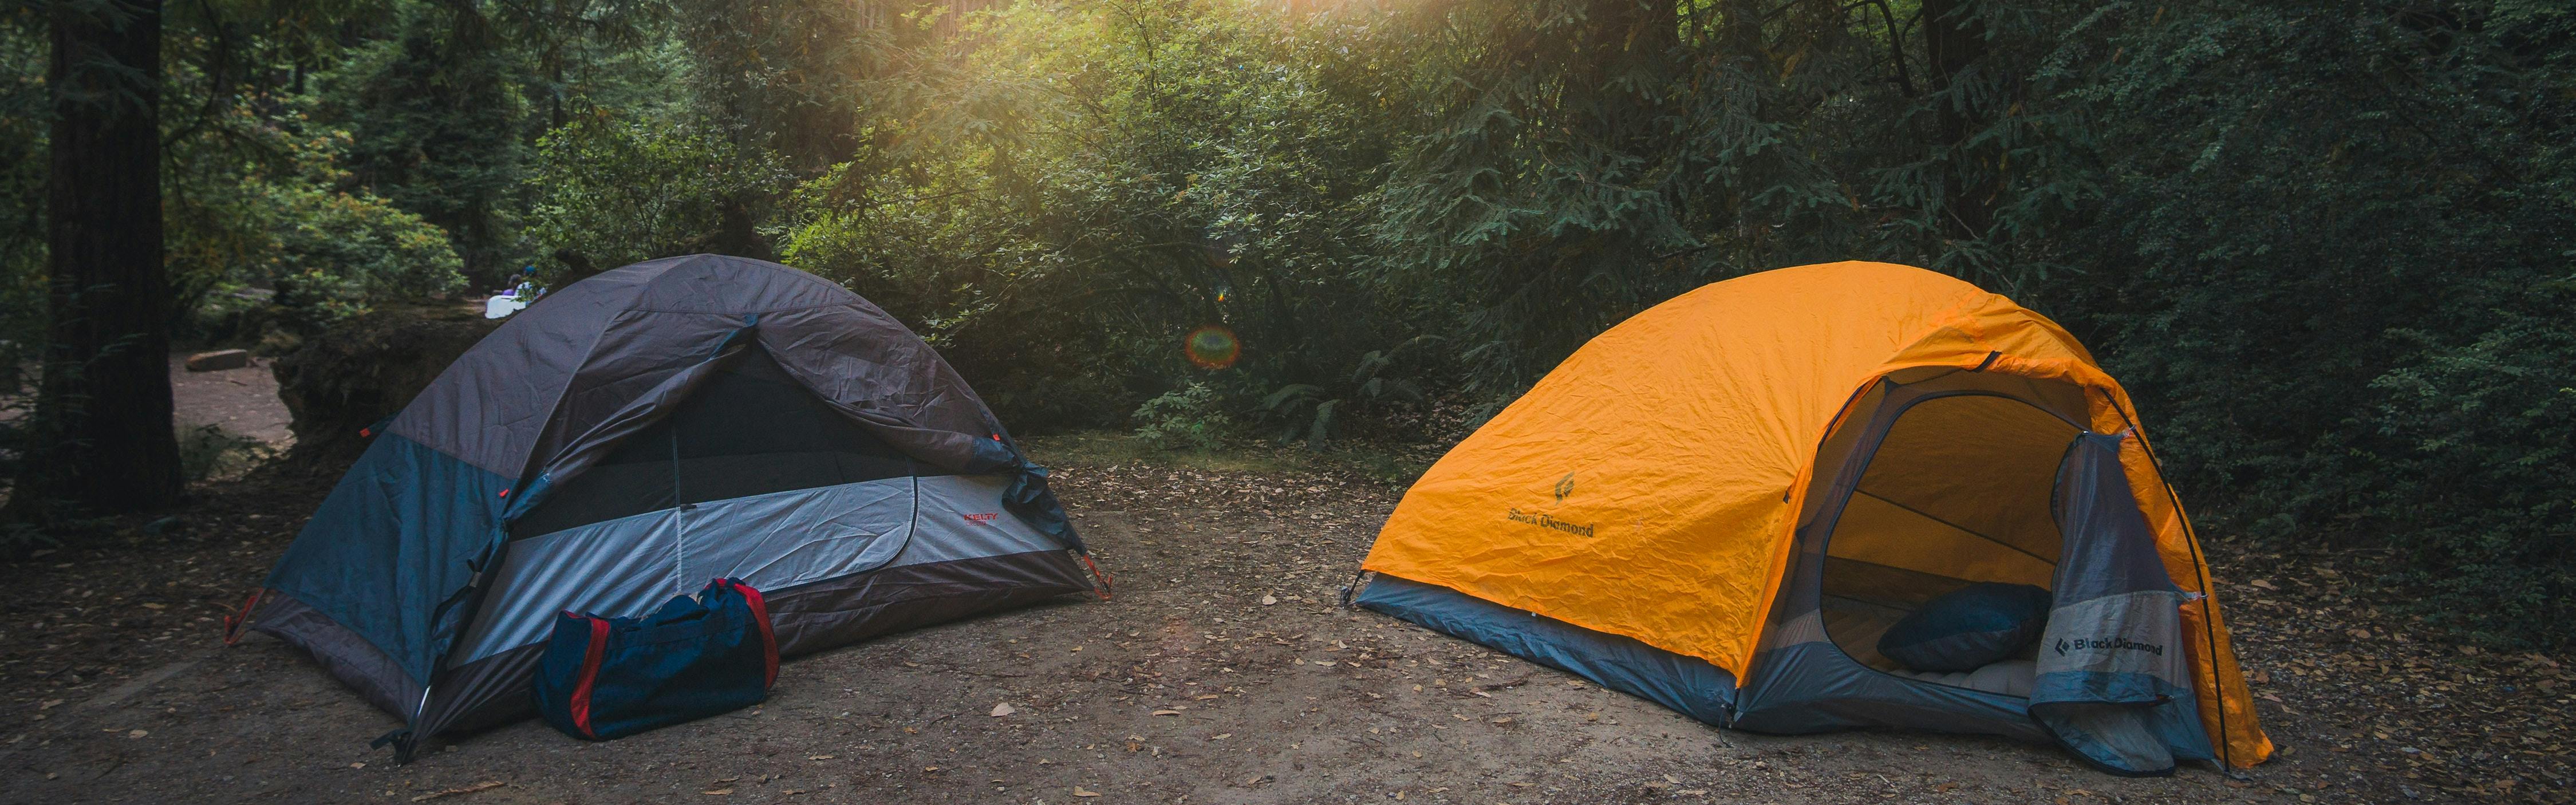 A campsite in a forest with two tents in front of trees